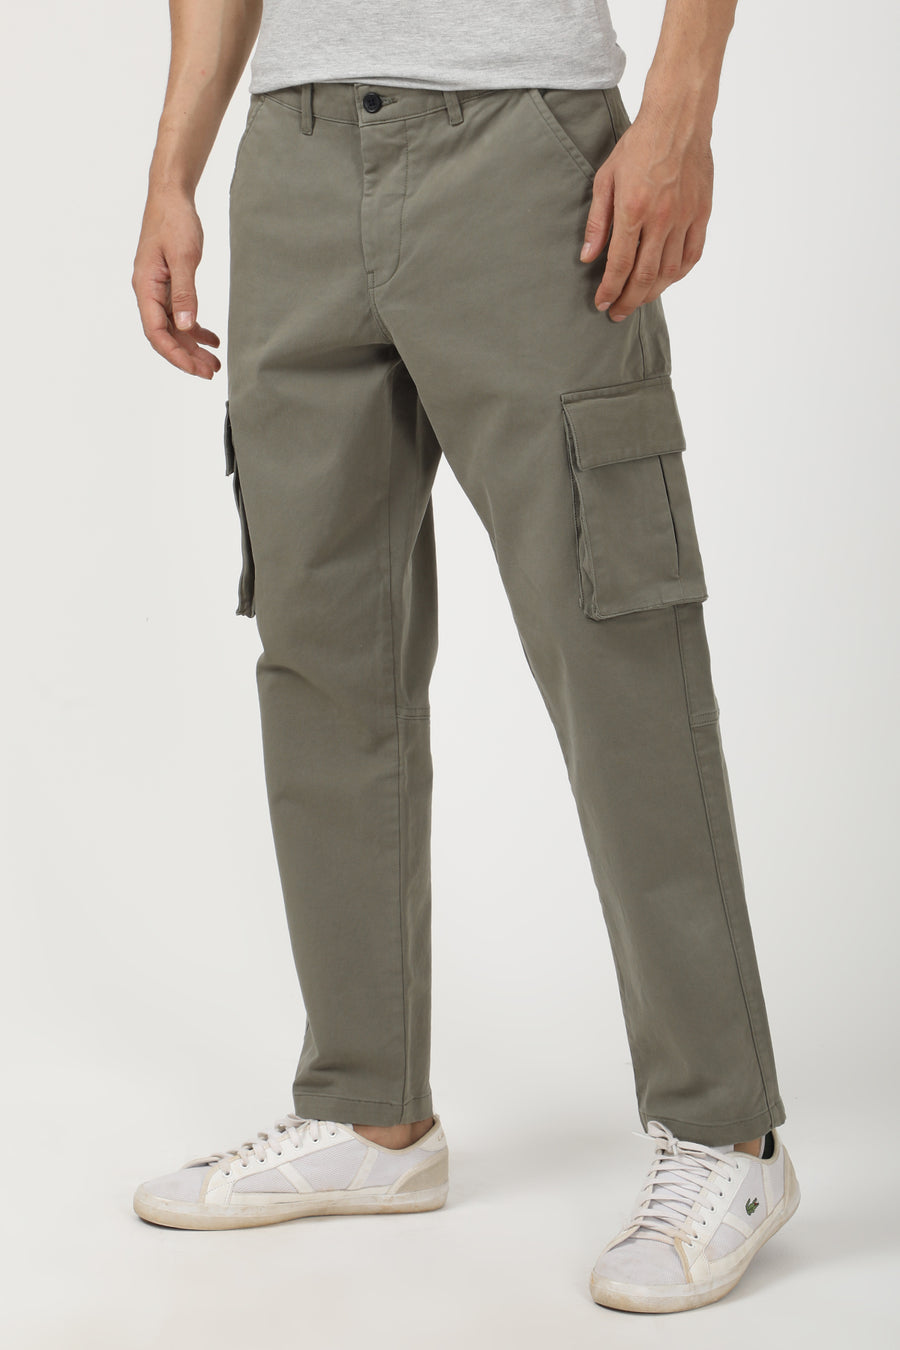 Creed - Comfort Cargo Trouser - Green